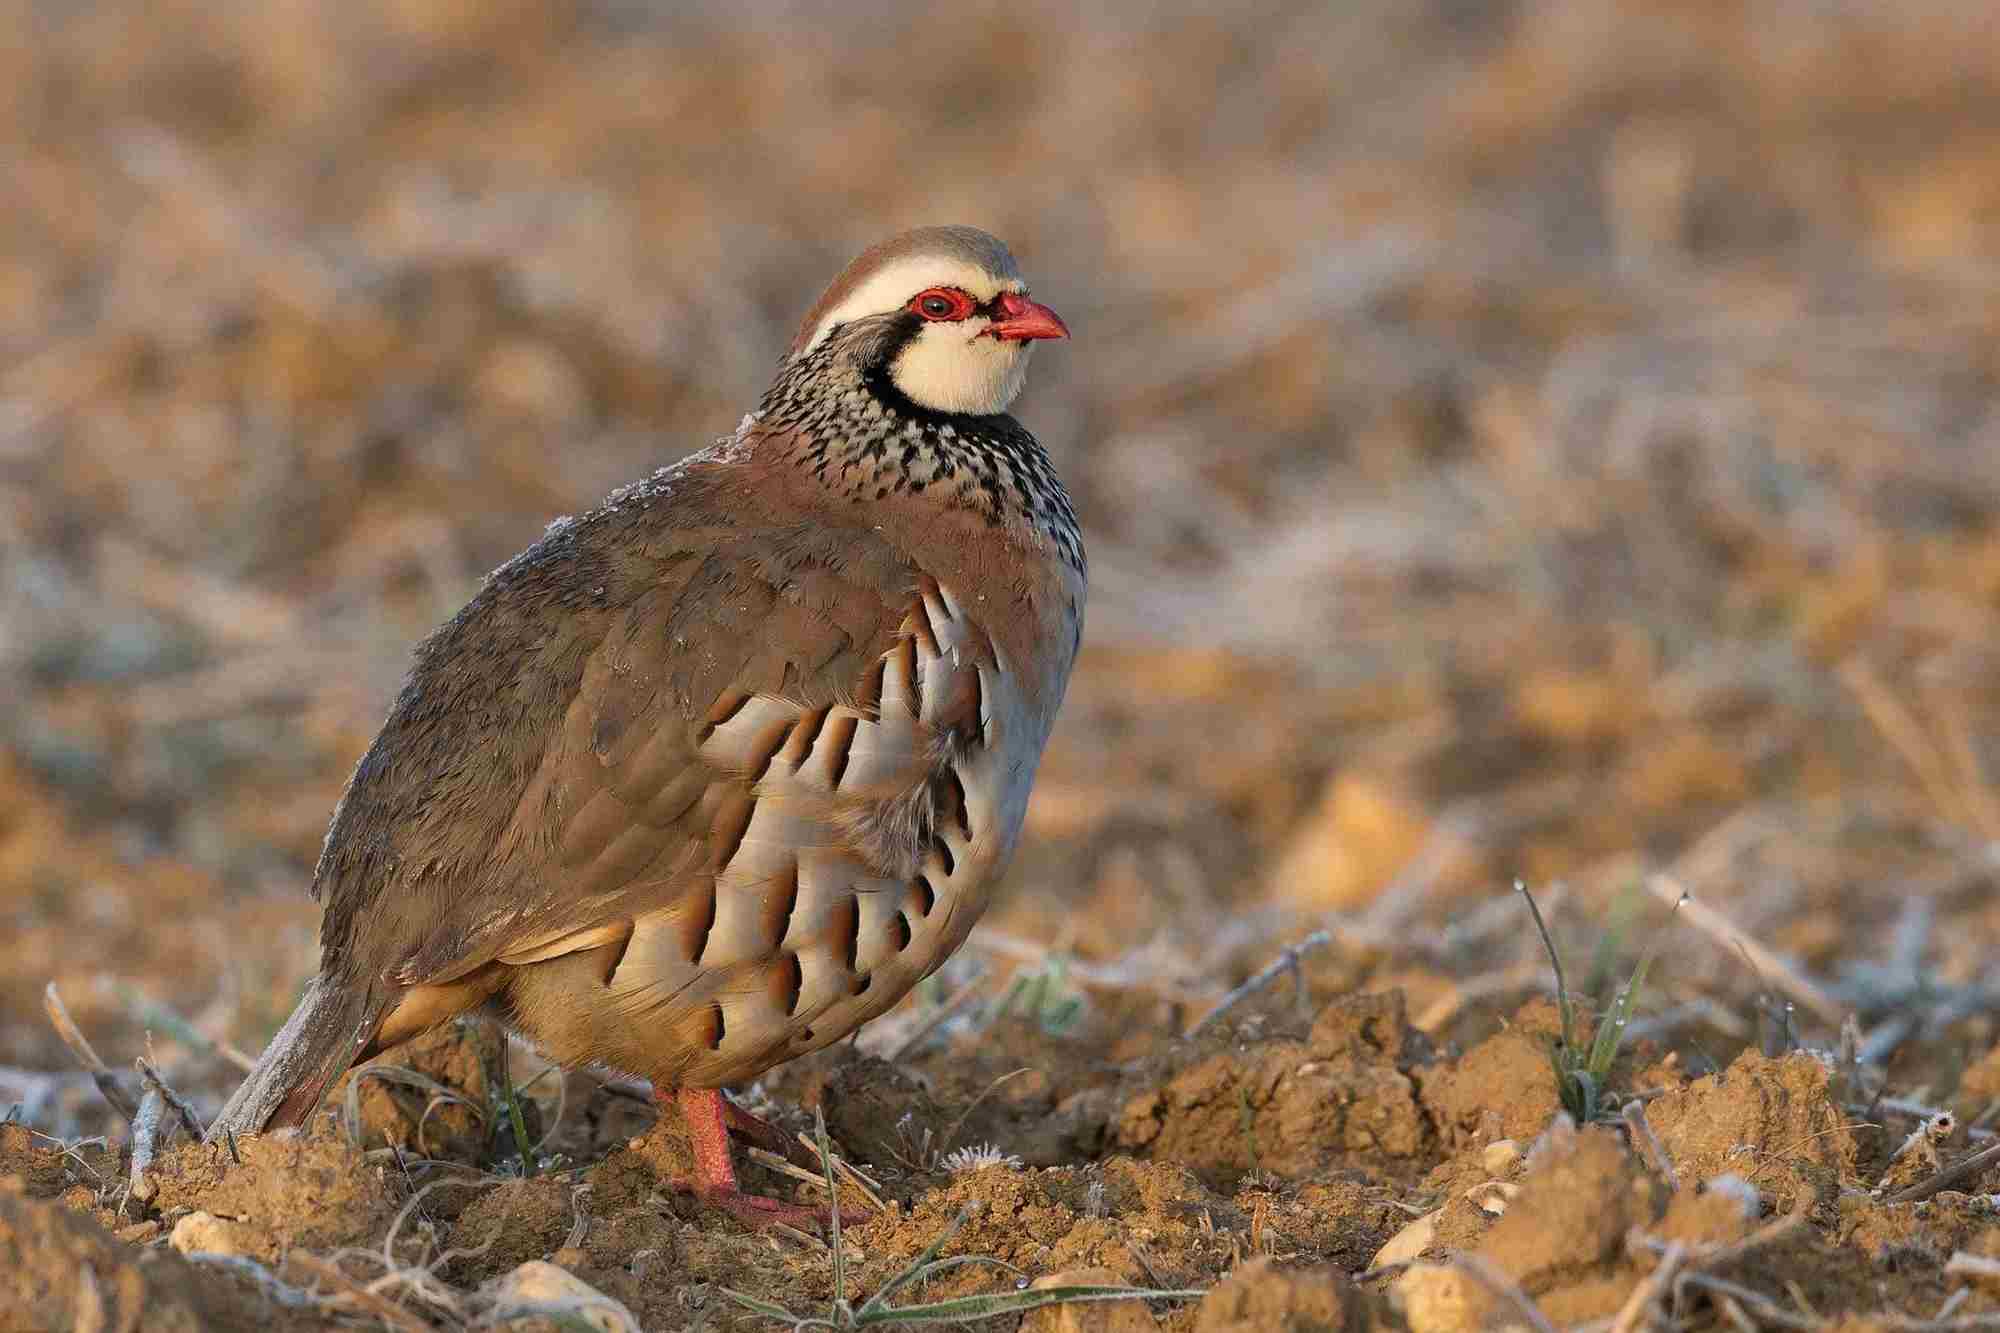 The French partridge also called red-legged partridge